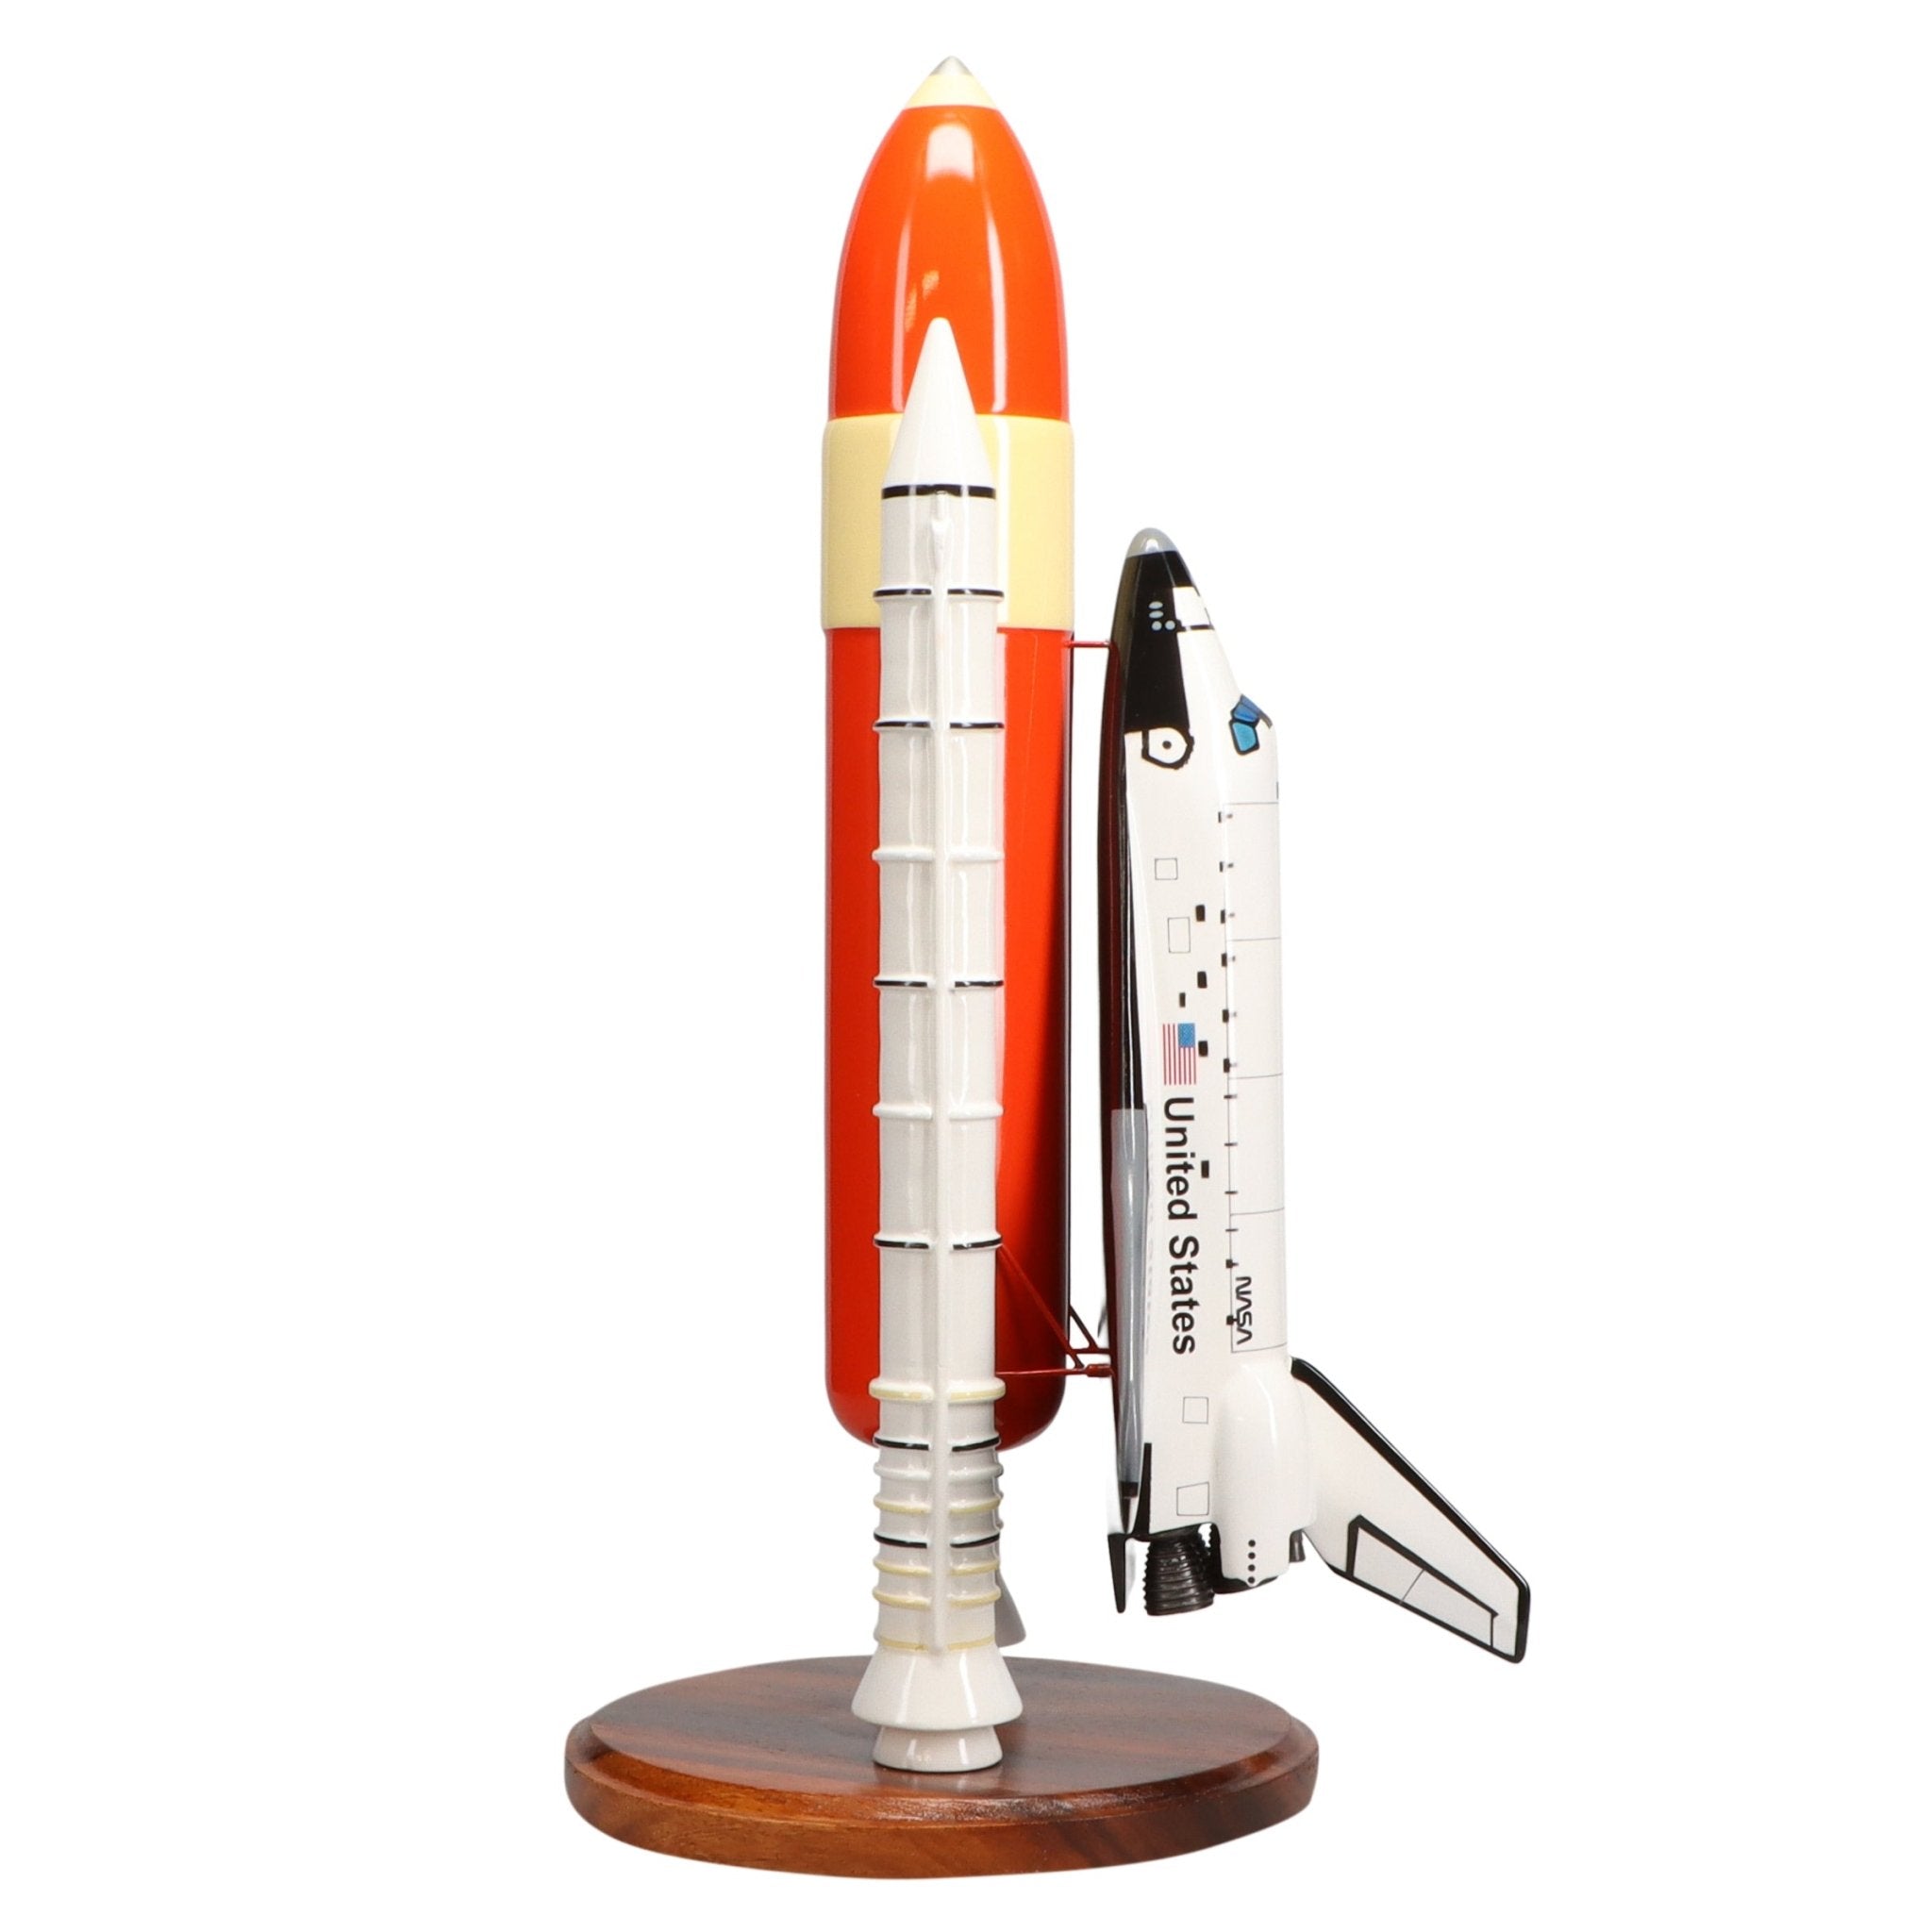 Space Shuttle Discovery with Booster Limited Edition Large Mahogany Model - PilotMall.com